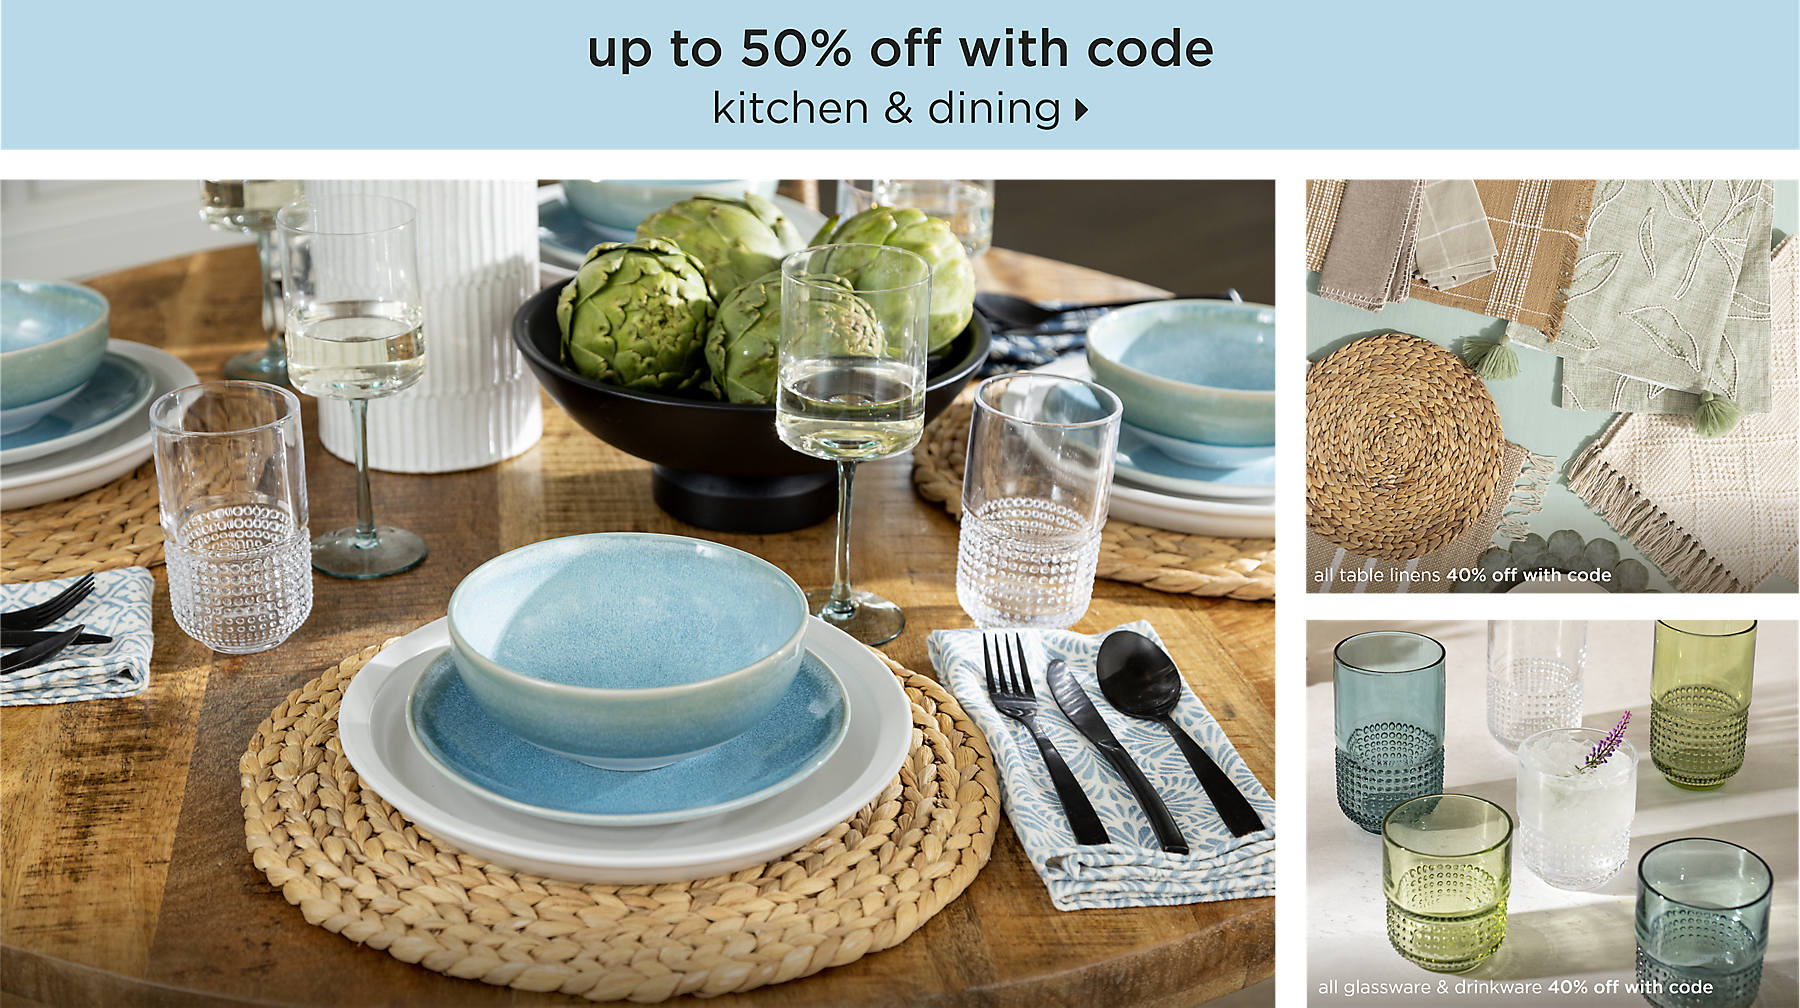 kitchen & dining up to 50% off with code shop now all table linens 40% off with code all glassware & drinkware 40% off with code